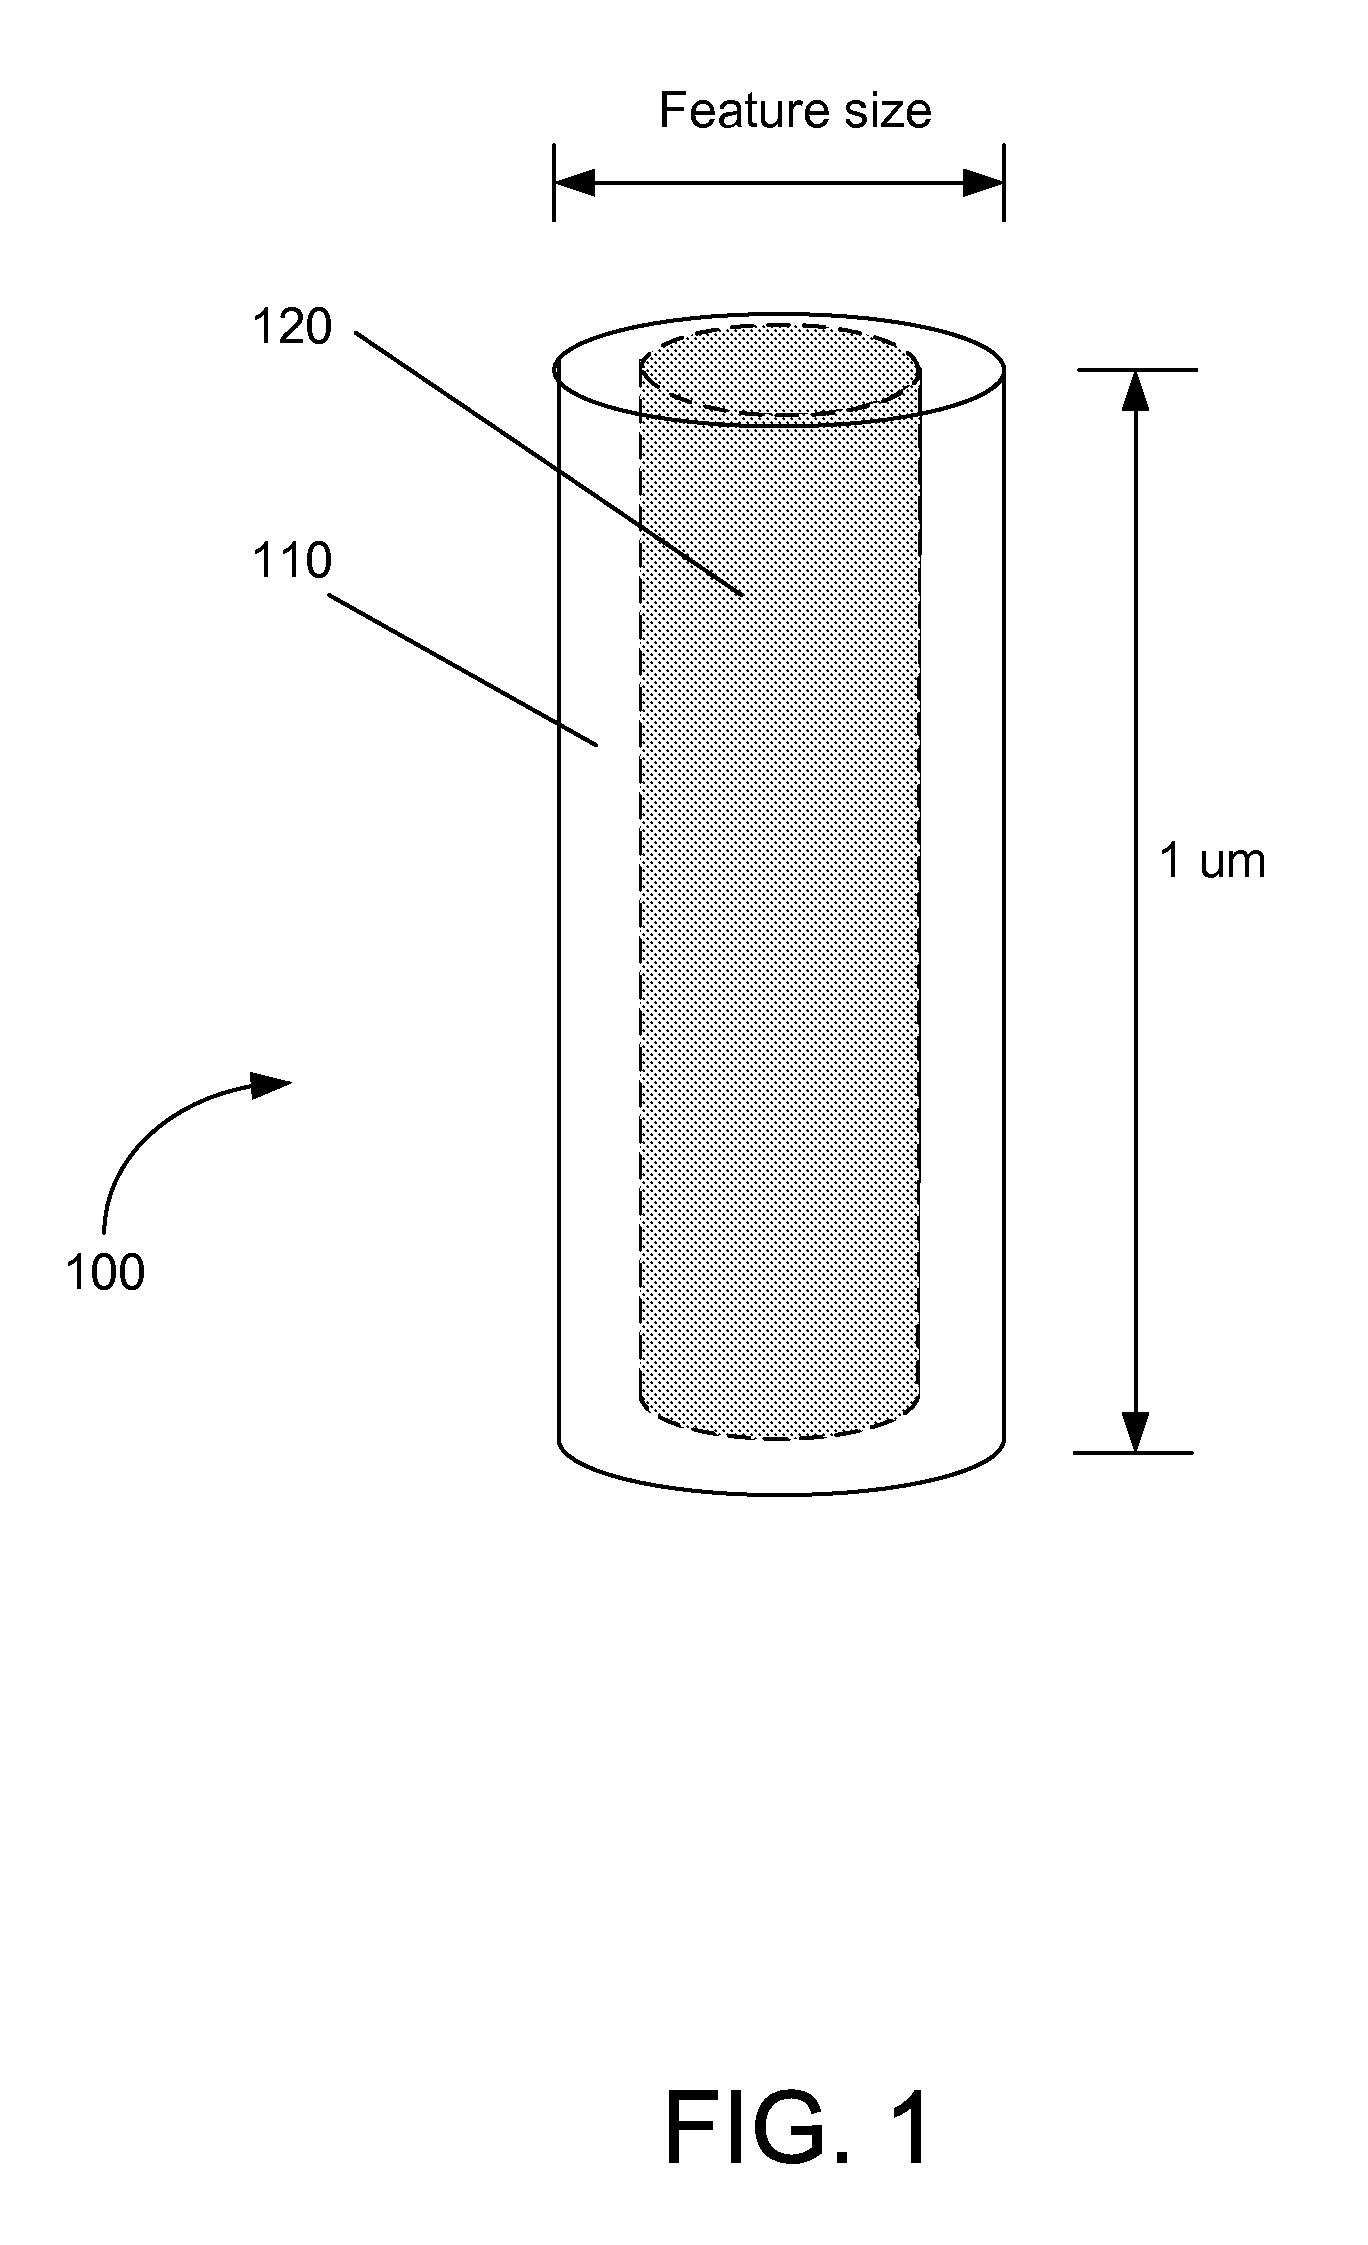 Method for forming tungsten contacts and interconnects with small critical dimensions